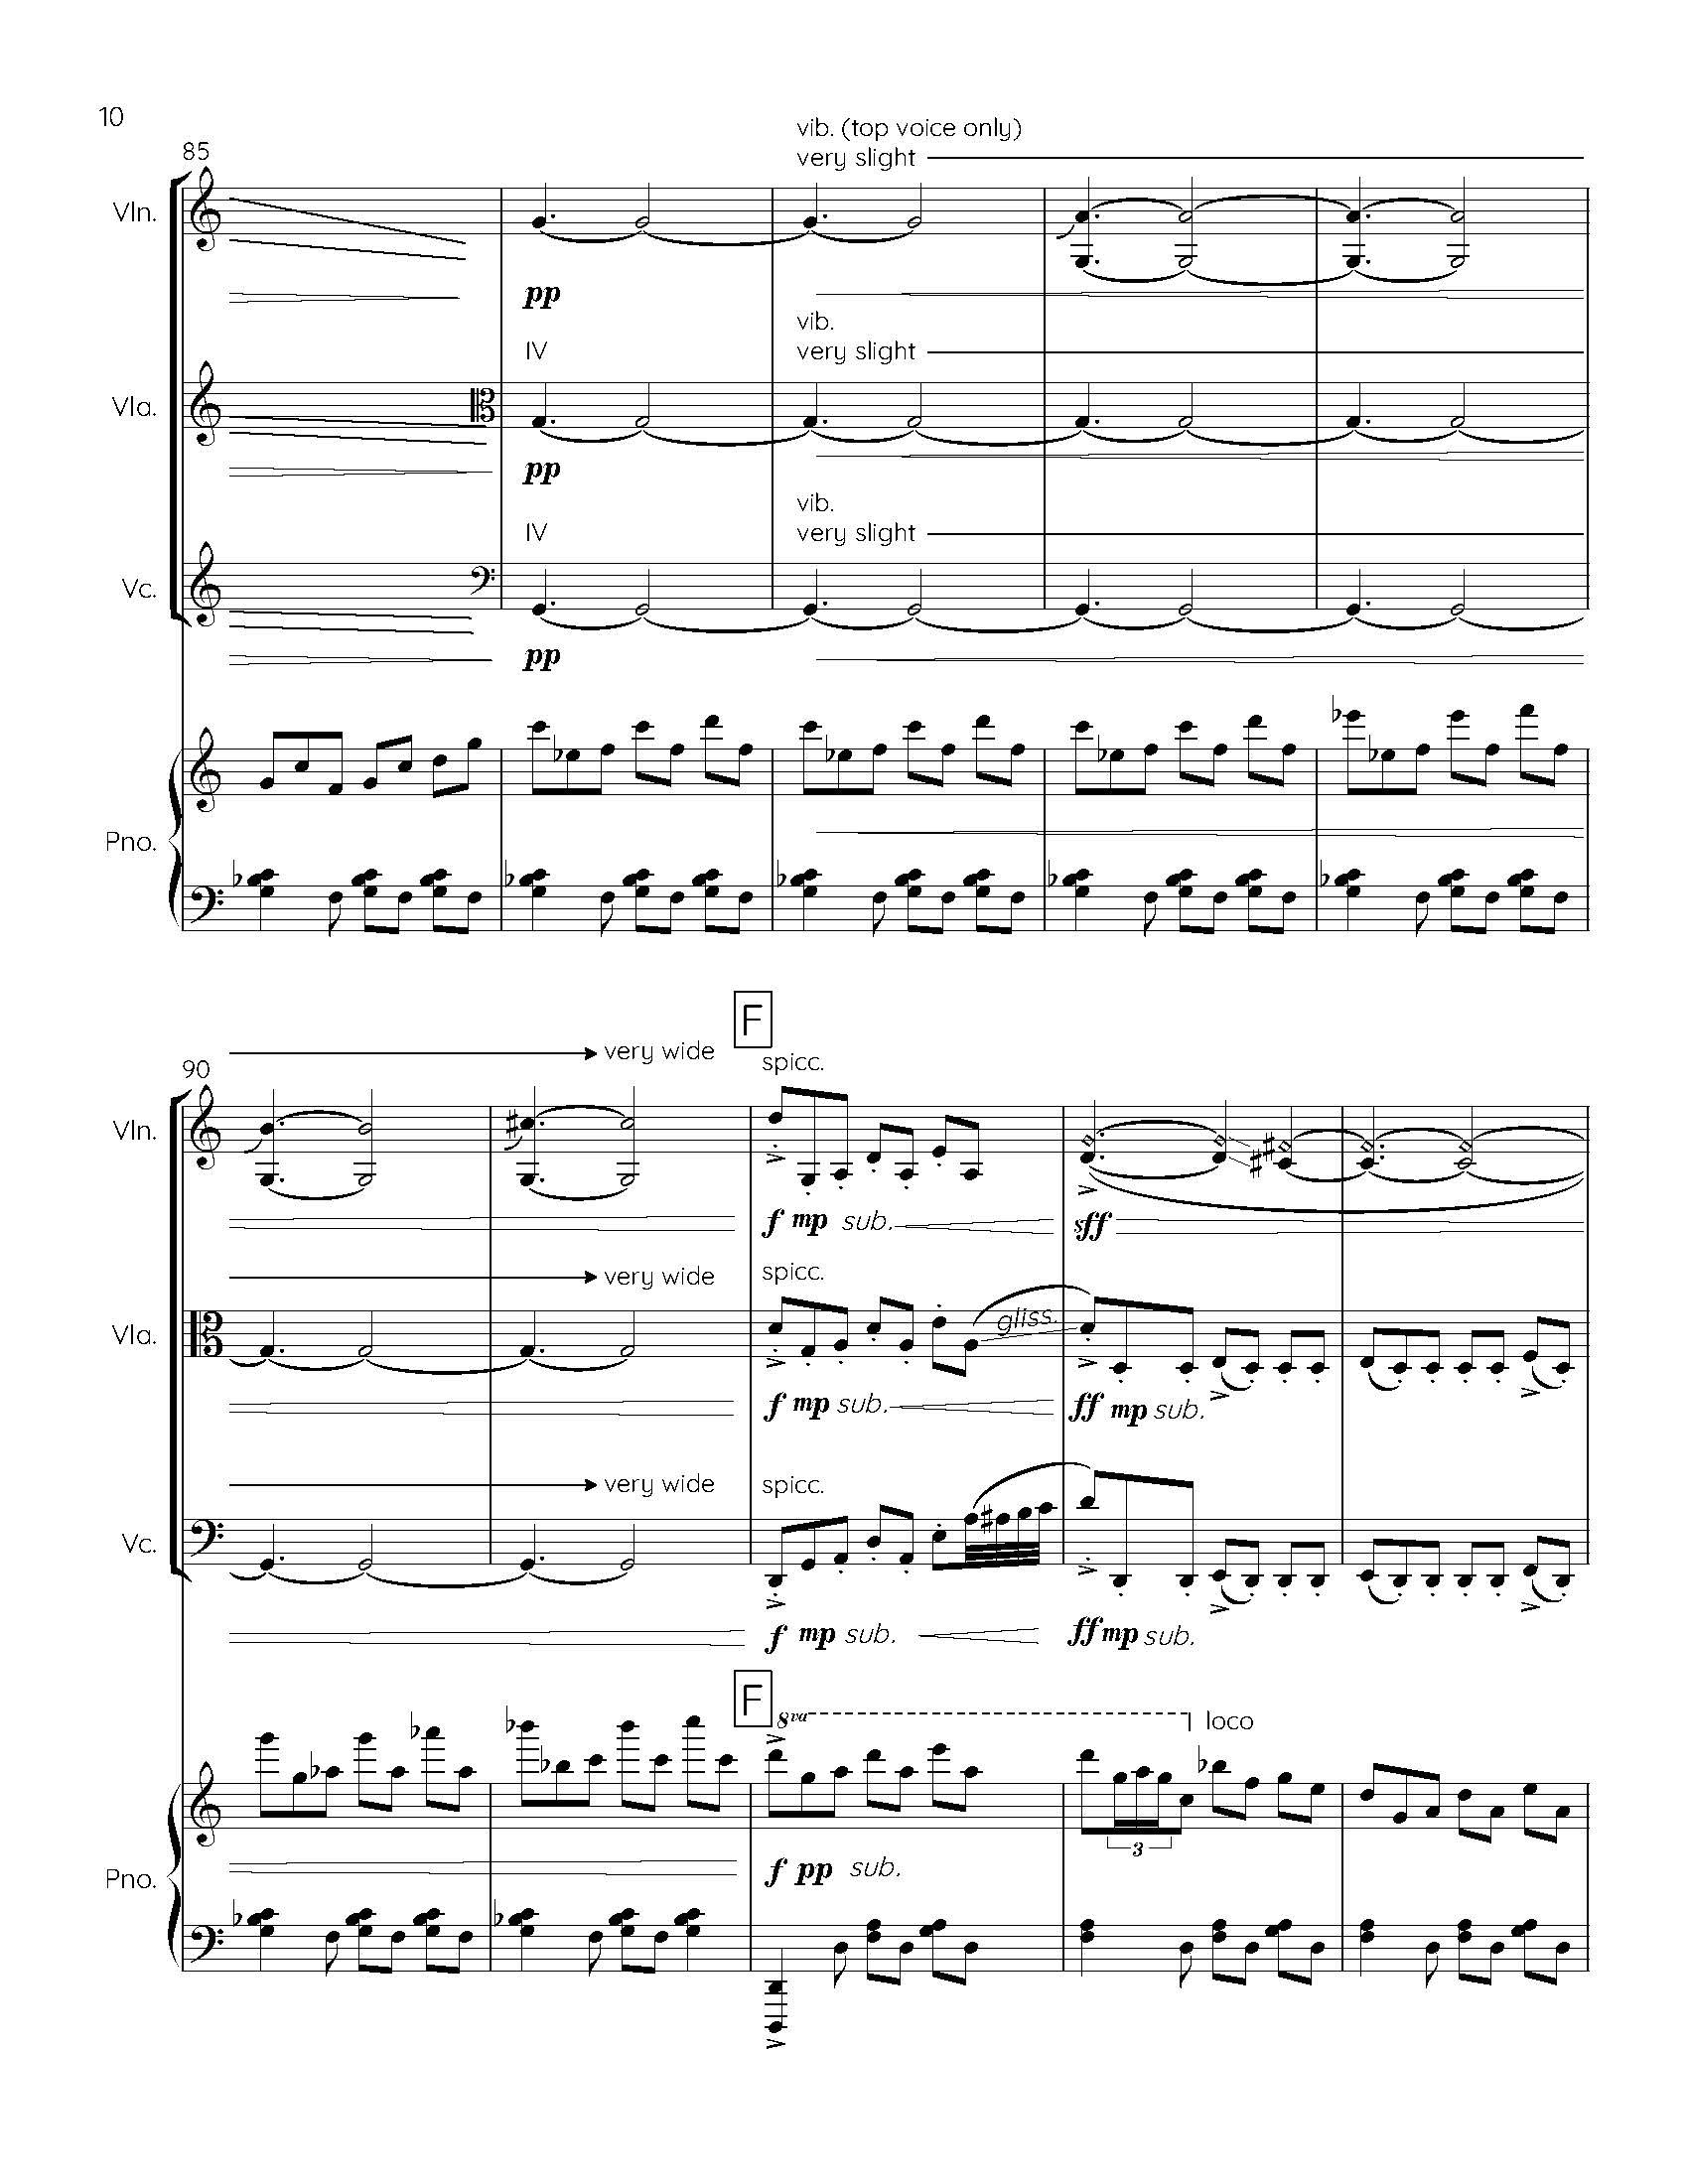 I S L A N D I - Complete Score_Page_16.jpg